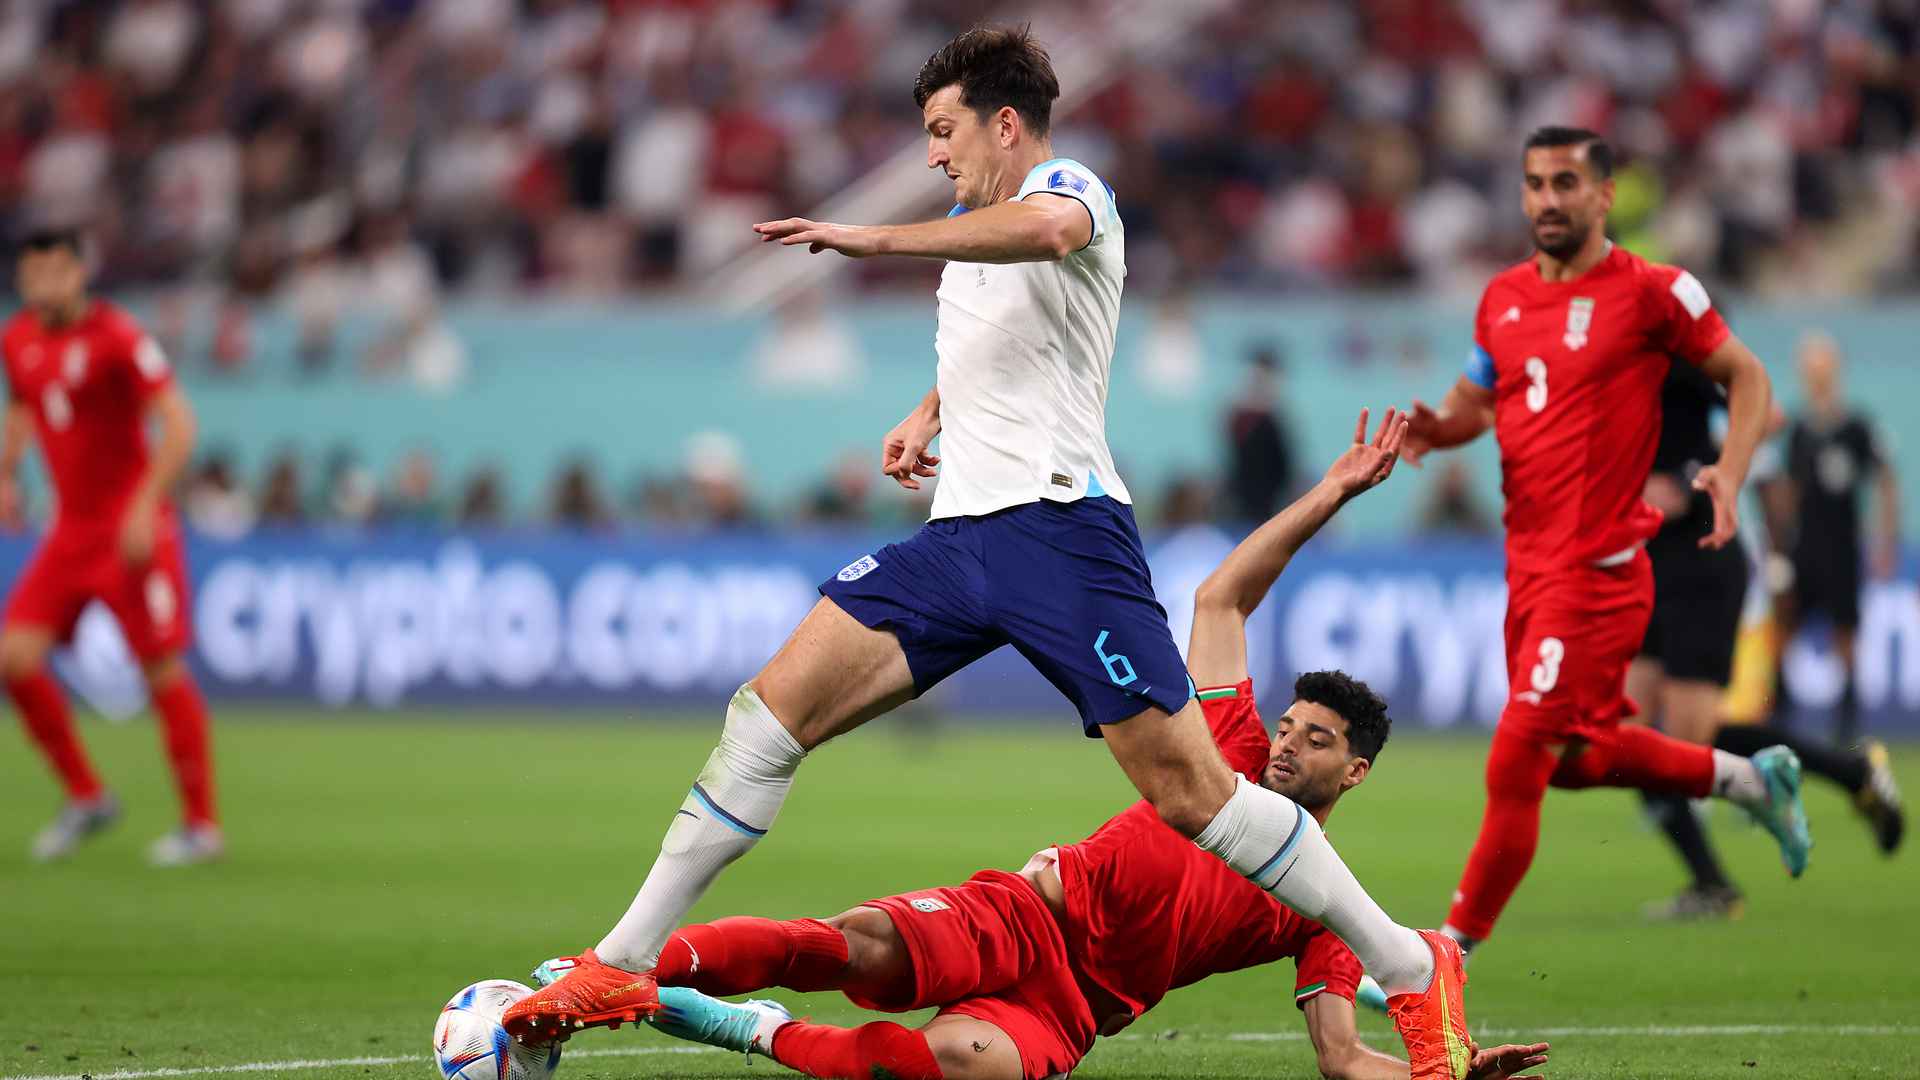 The Debate: England Reds backed to continue shining